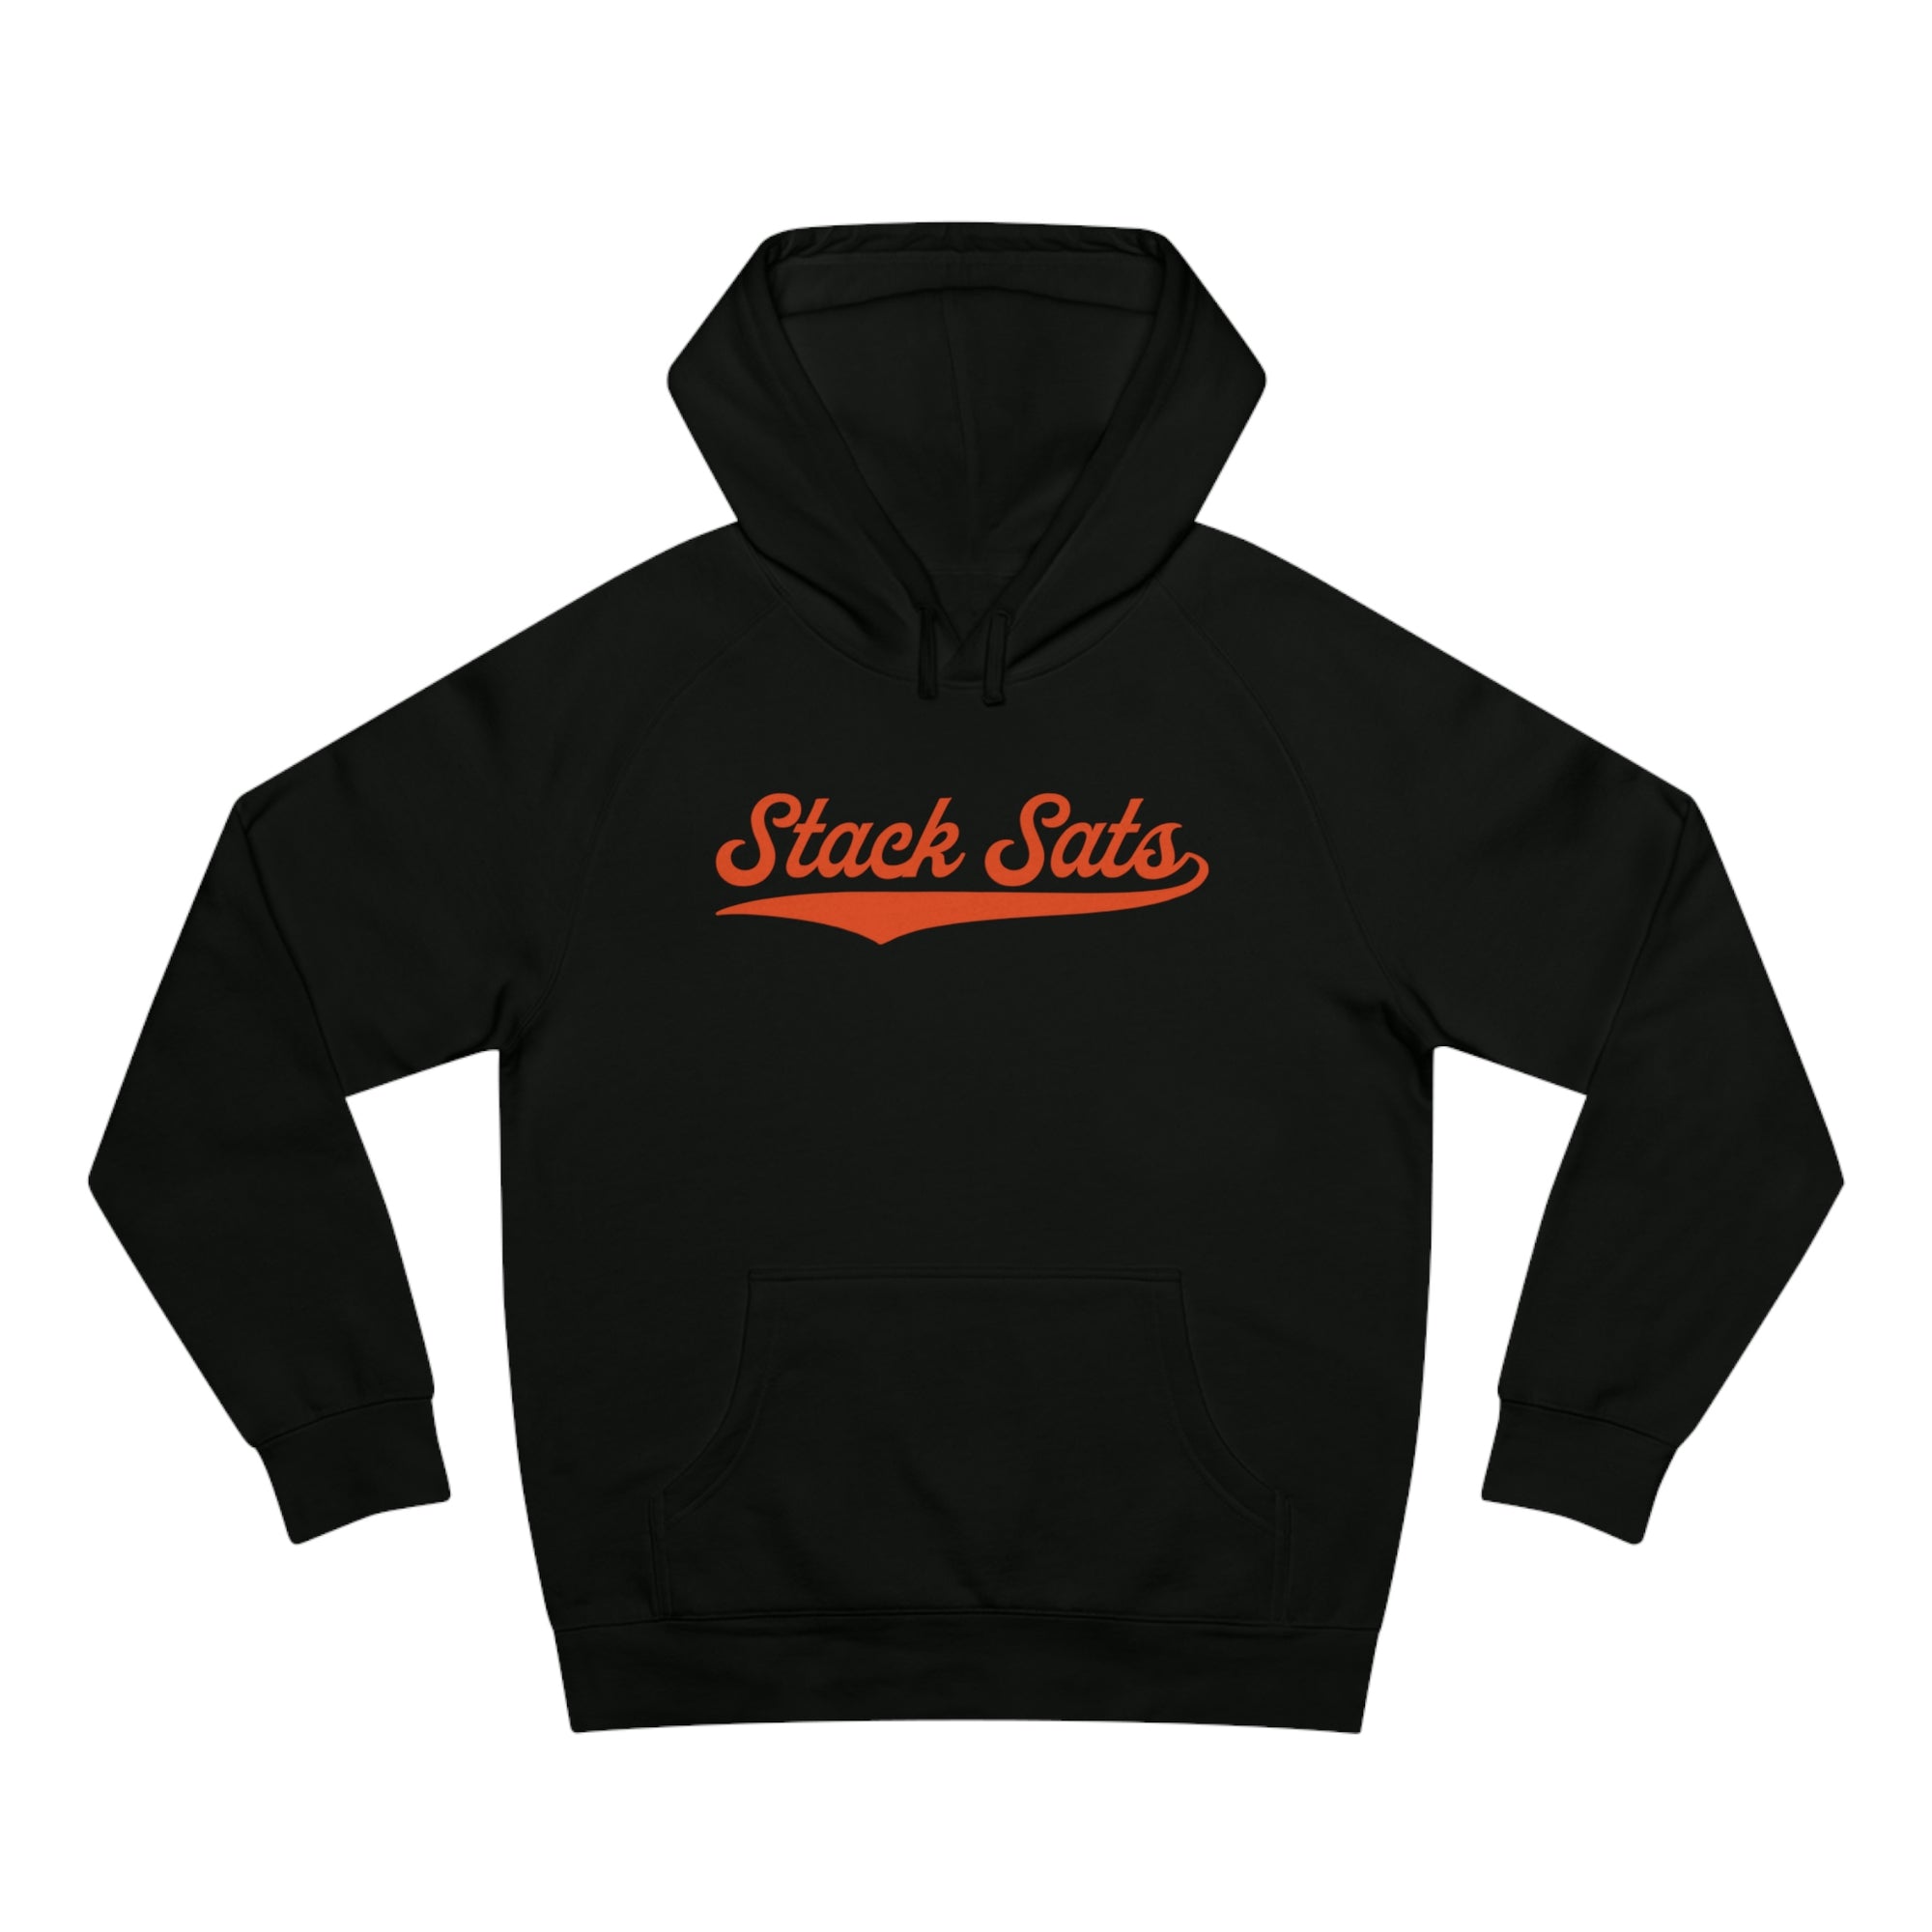 Bitcoin Hoodie - Our Stack Sats Hoodie features an orange script logo. Hoodie color: Black. Front view.